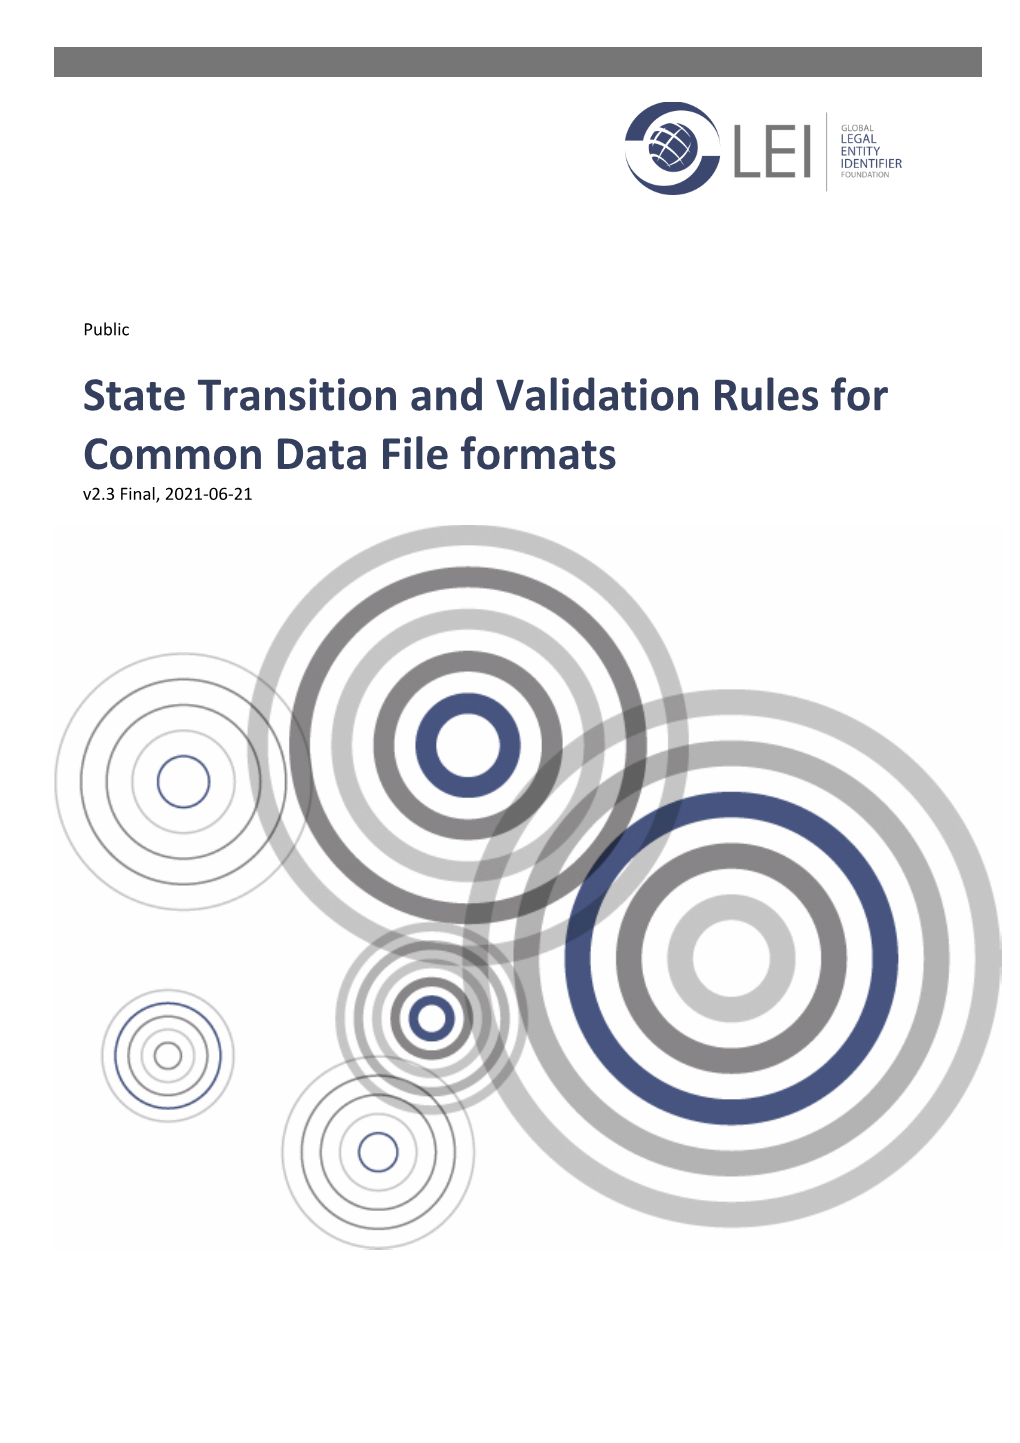 State Transition and Validation Rules for Common Data File Formats